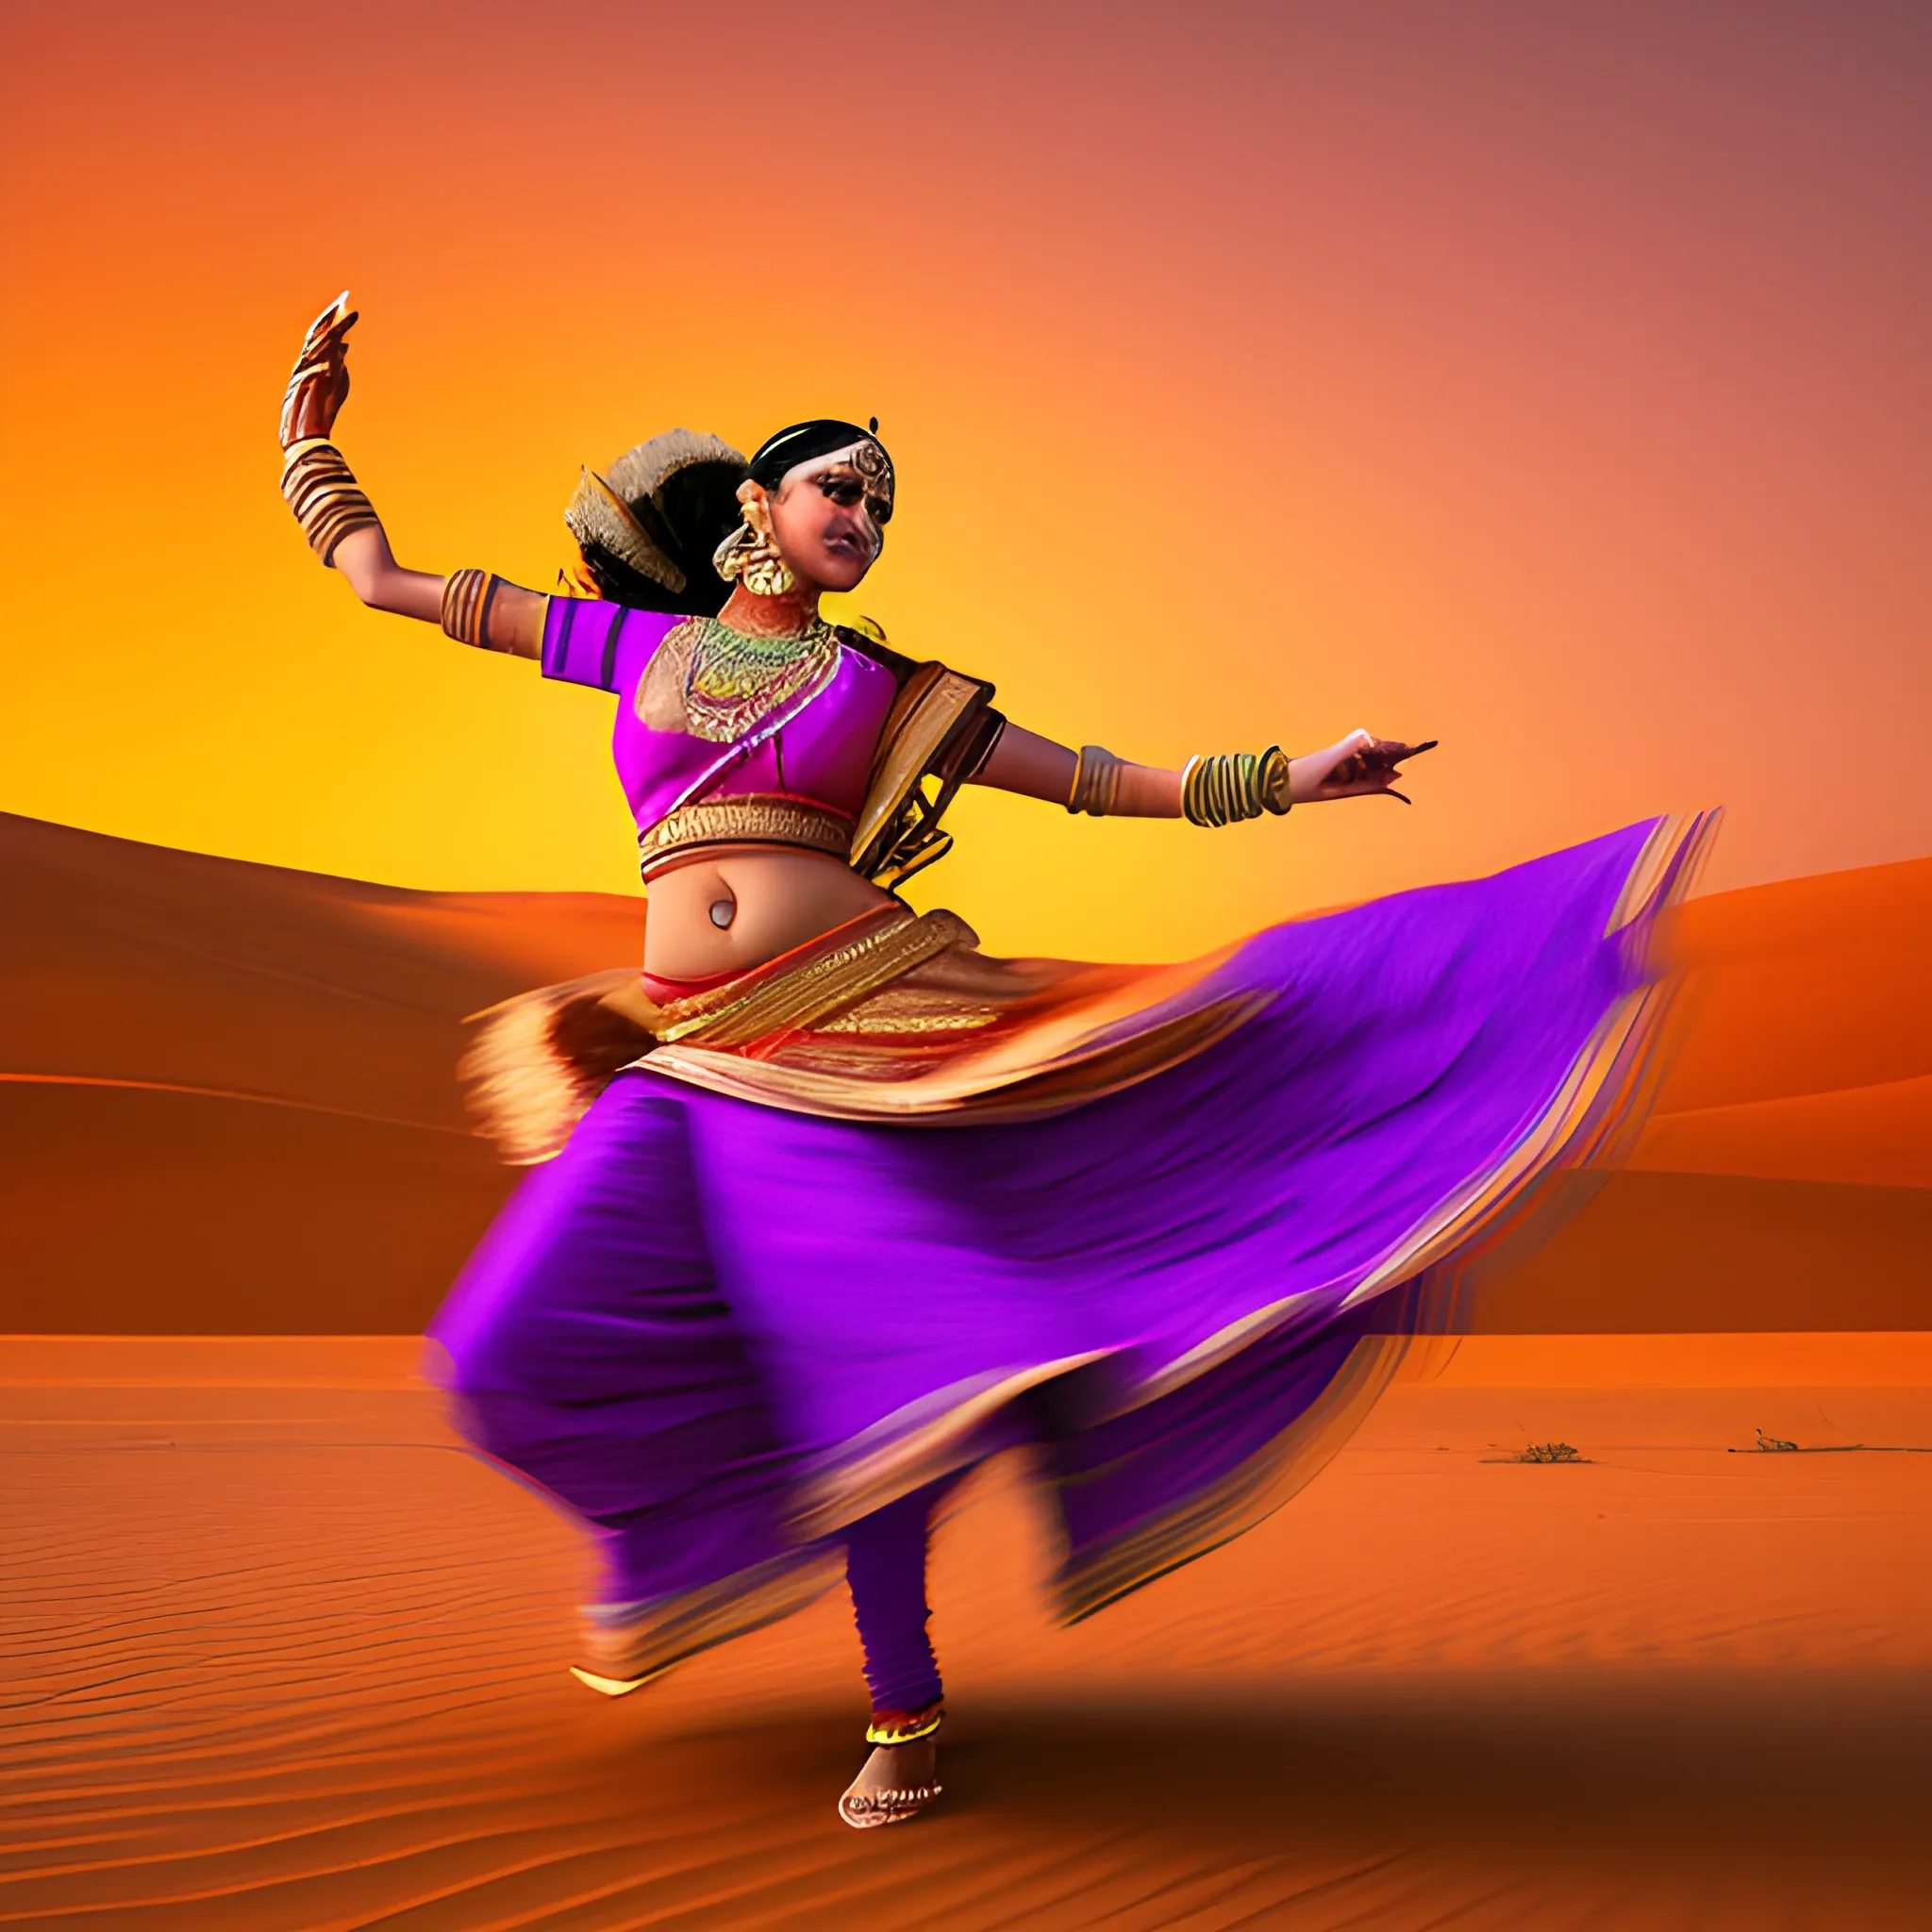 Panning Effect Photography, mixed eclectic beauty Rajasthani dancer women in traditional cloths in her unconventional action portrait wearing reverberating glowbow digital art in beautiful selective complementary colors in the desert at night - --v 6.0